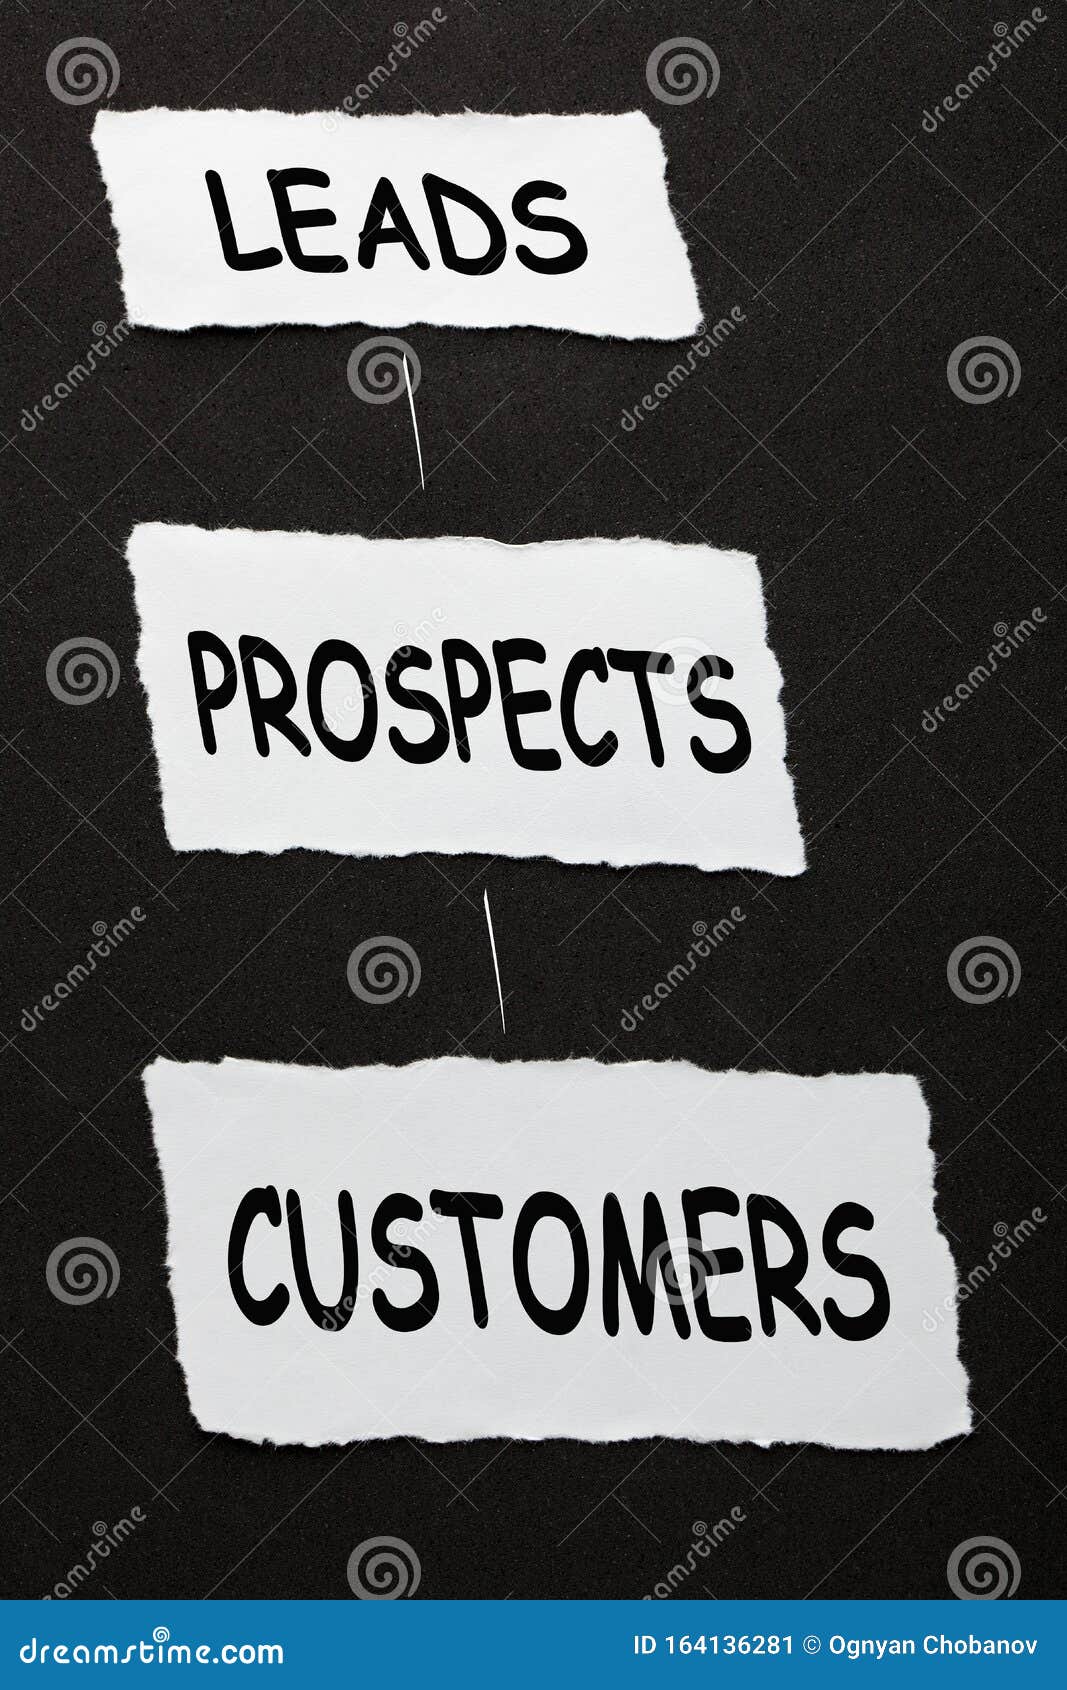 leads prospects customers